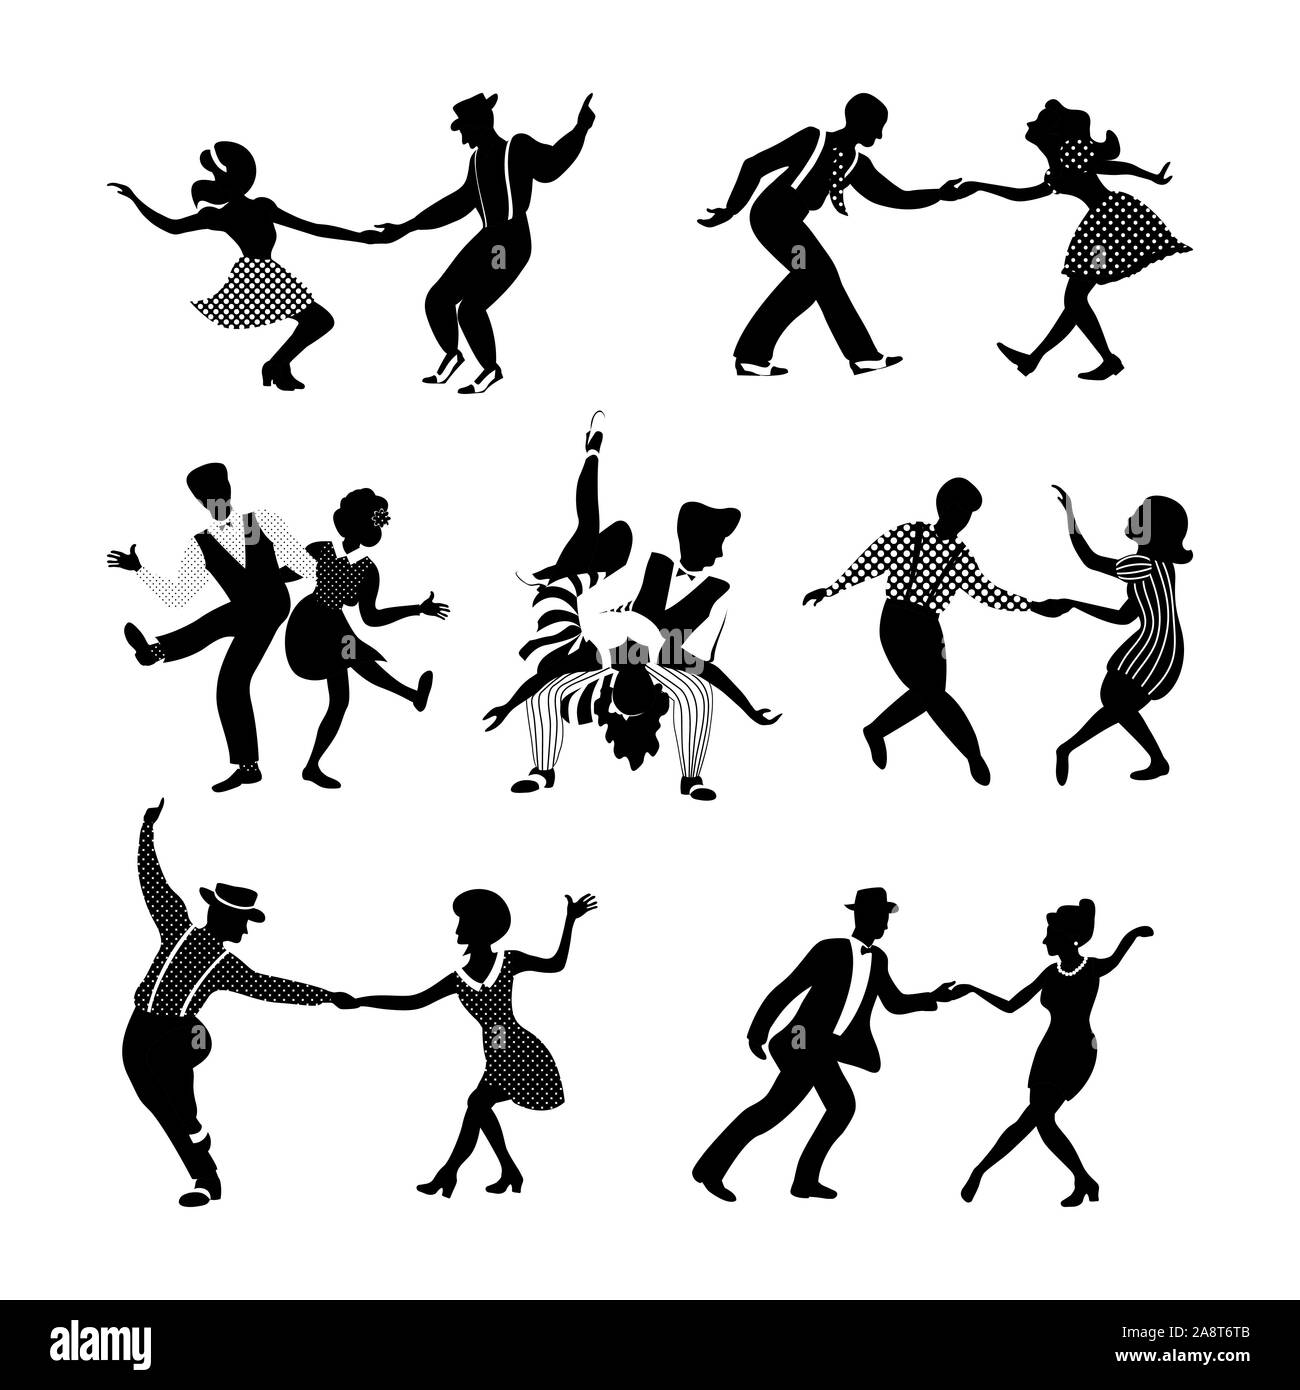 Swing dancing Black and White Stock Photos & Images - Alamy